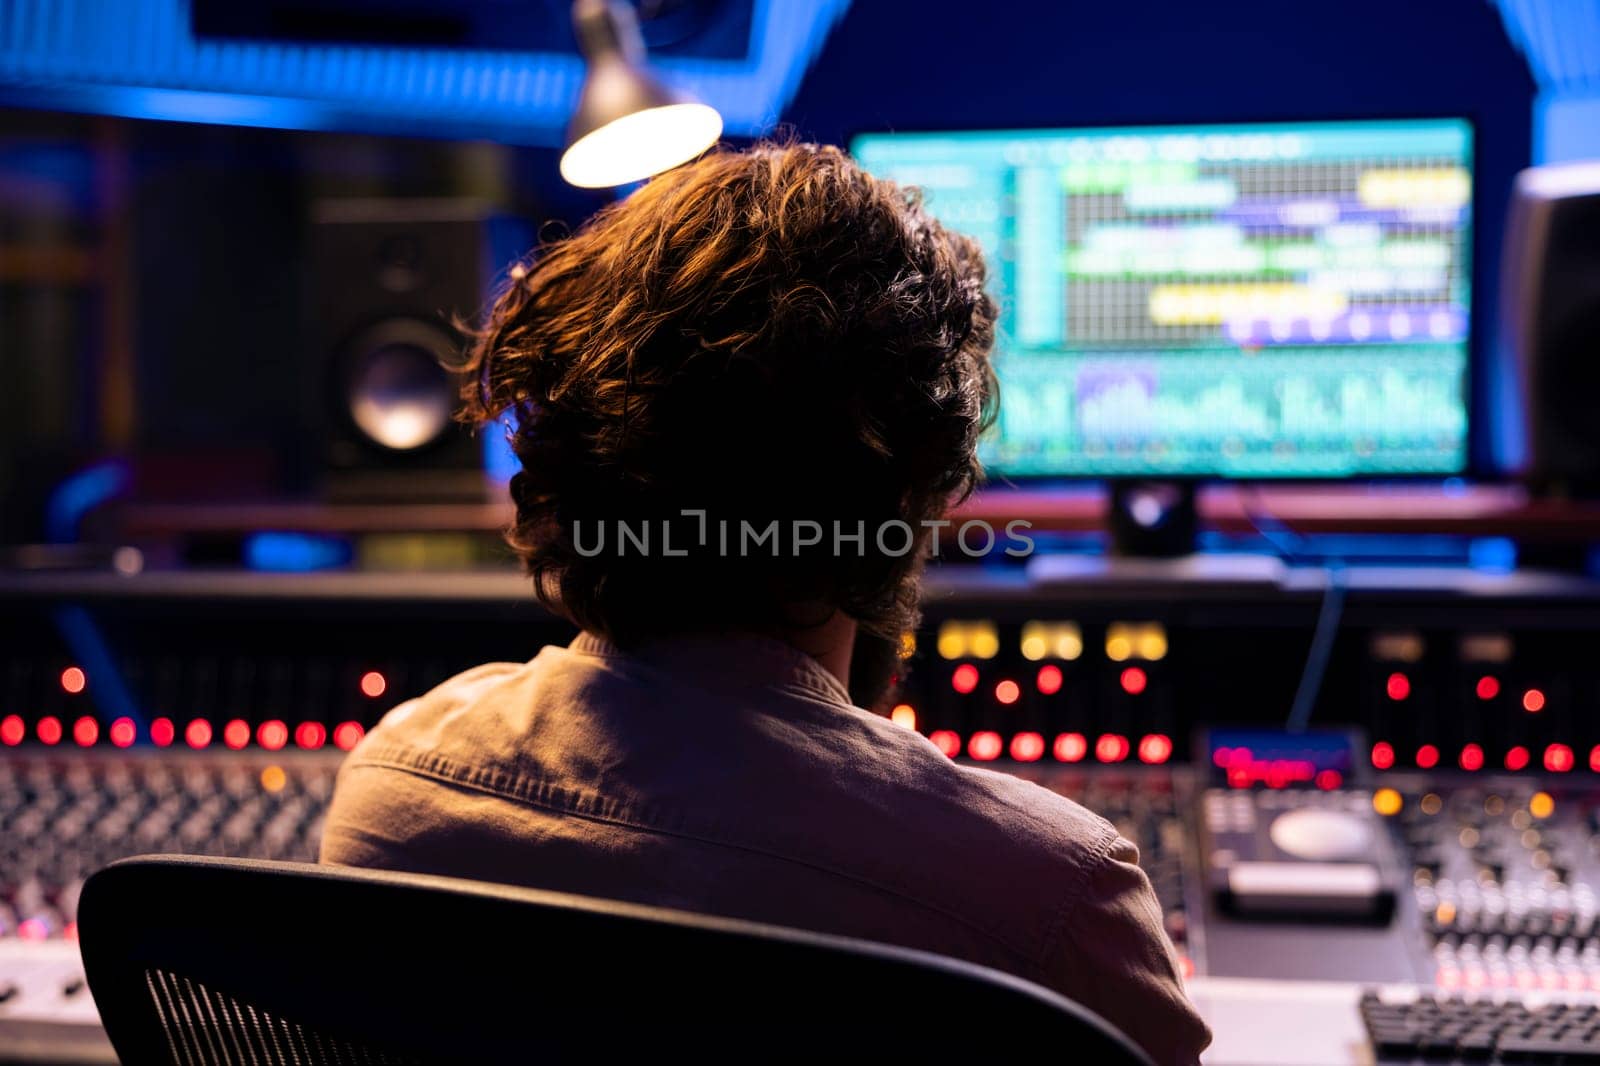 Sound designer tuning audio recordings with faders and buttons on control desk in professional music studio, mixing and mastering tracks for a new album. Adjusting volume levels with equalizer.